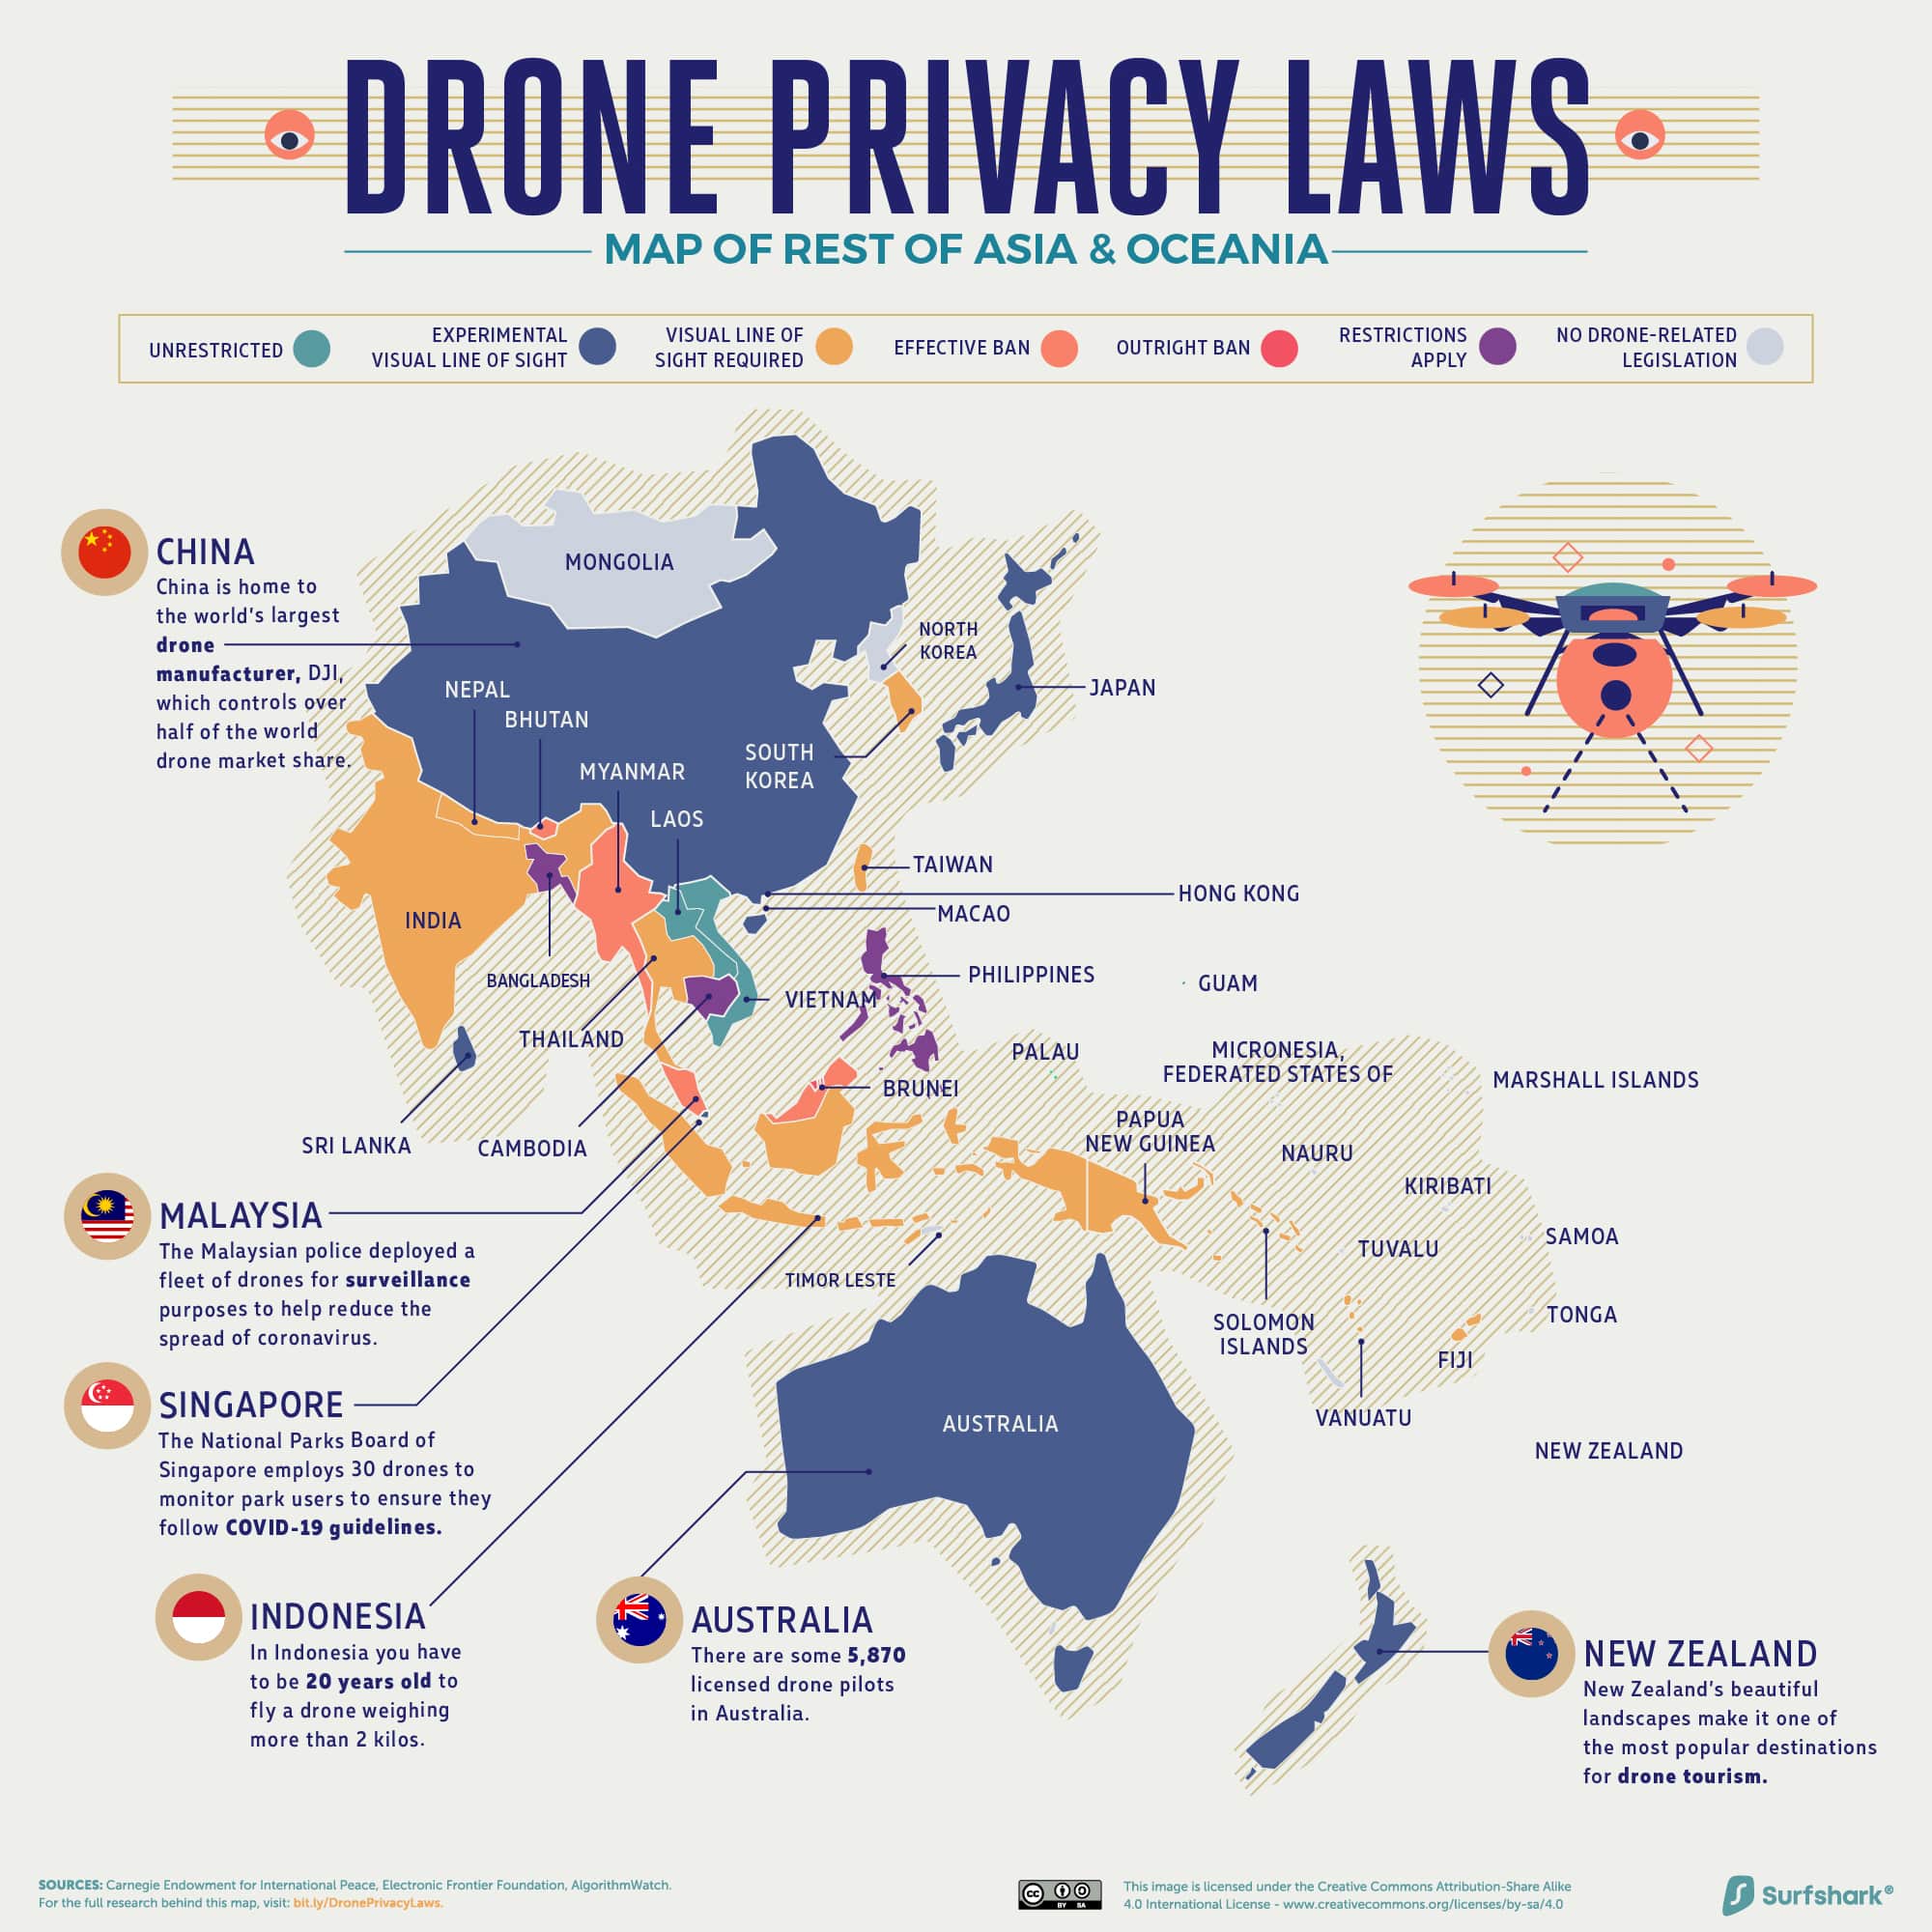 a map of the rest of Asia and Oceania with drone privacy laws for each country coded in color